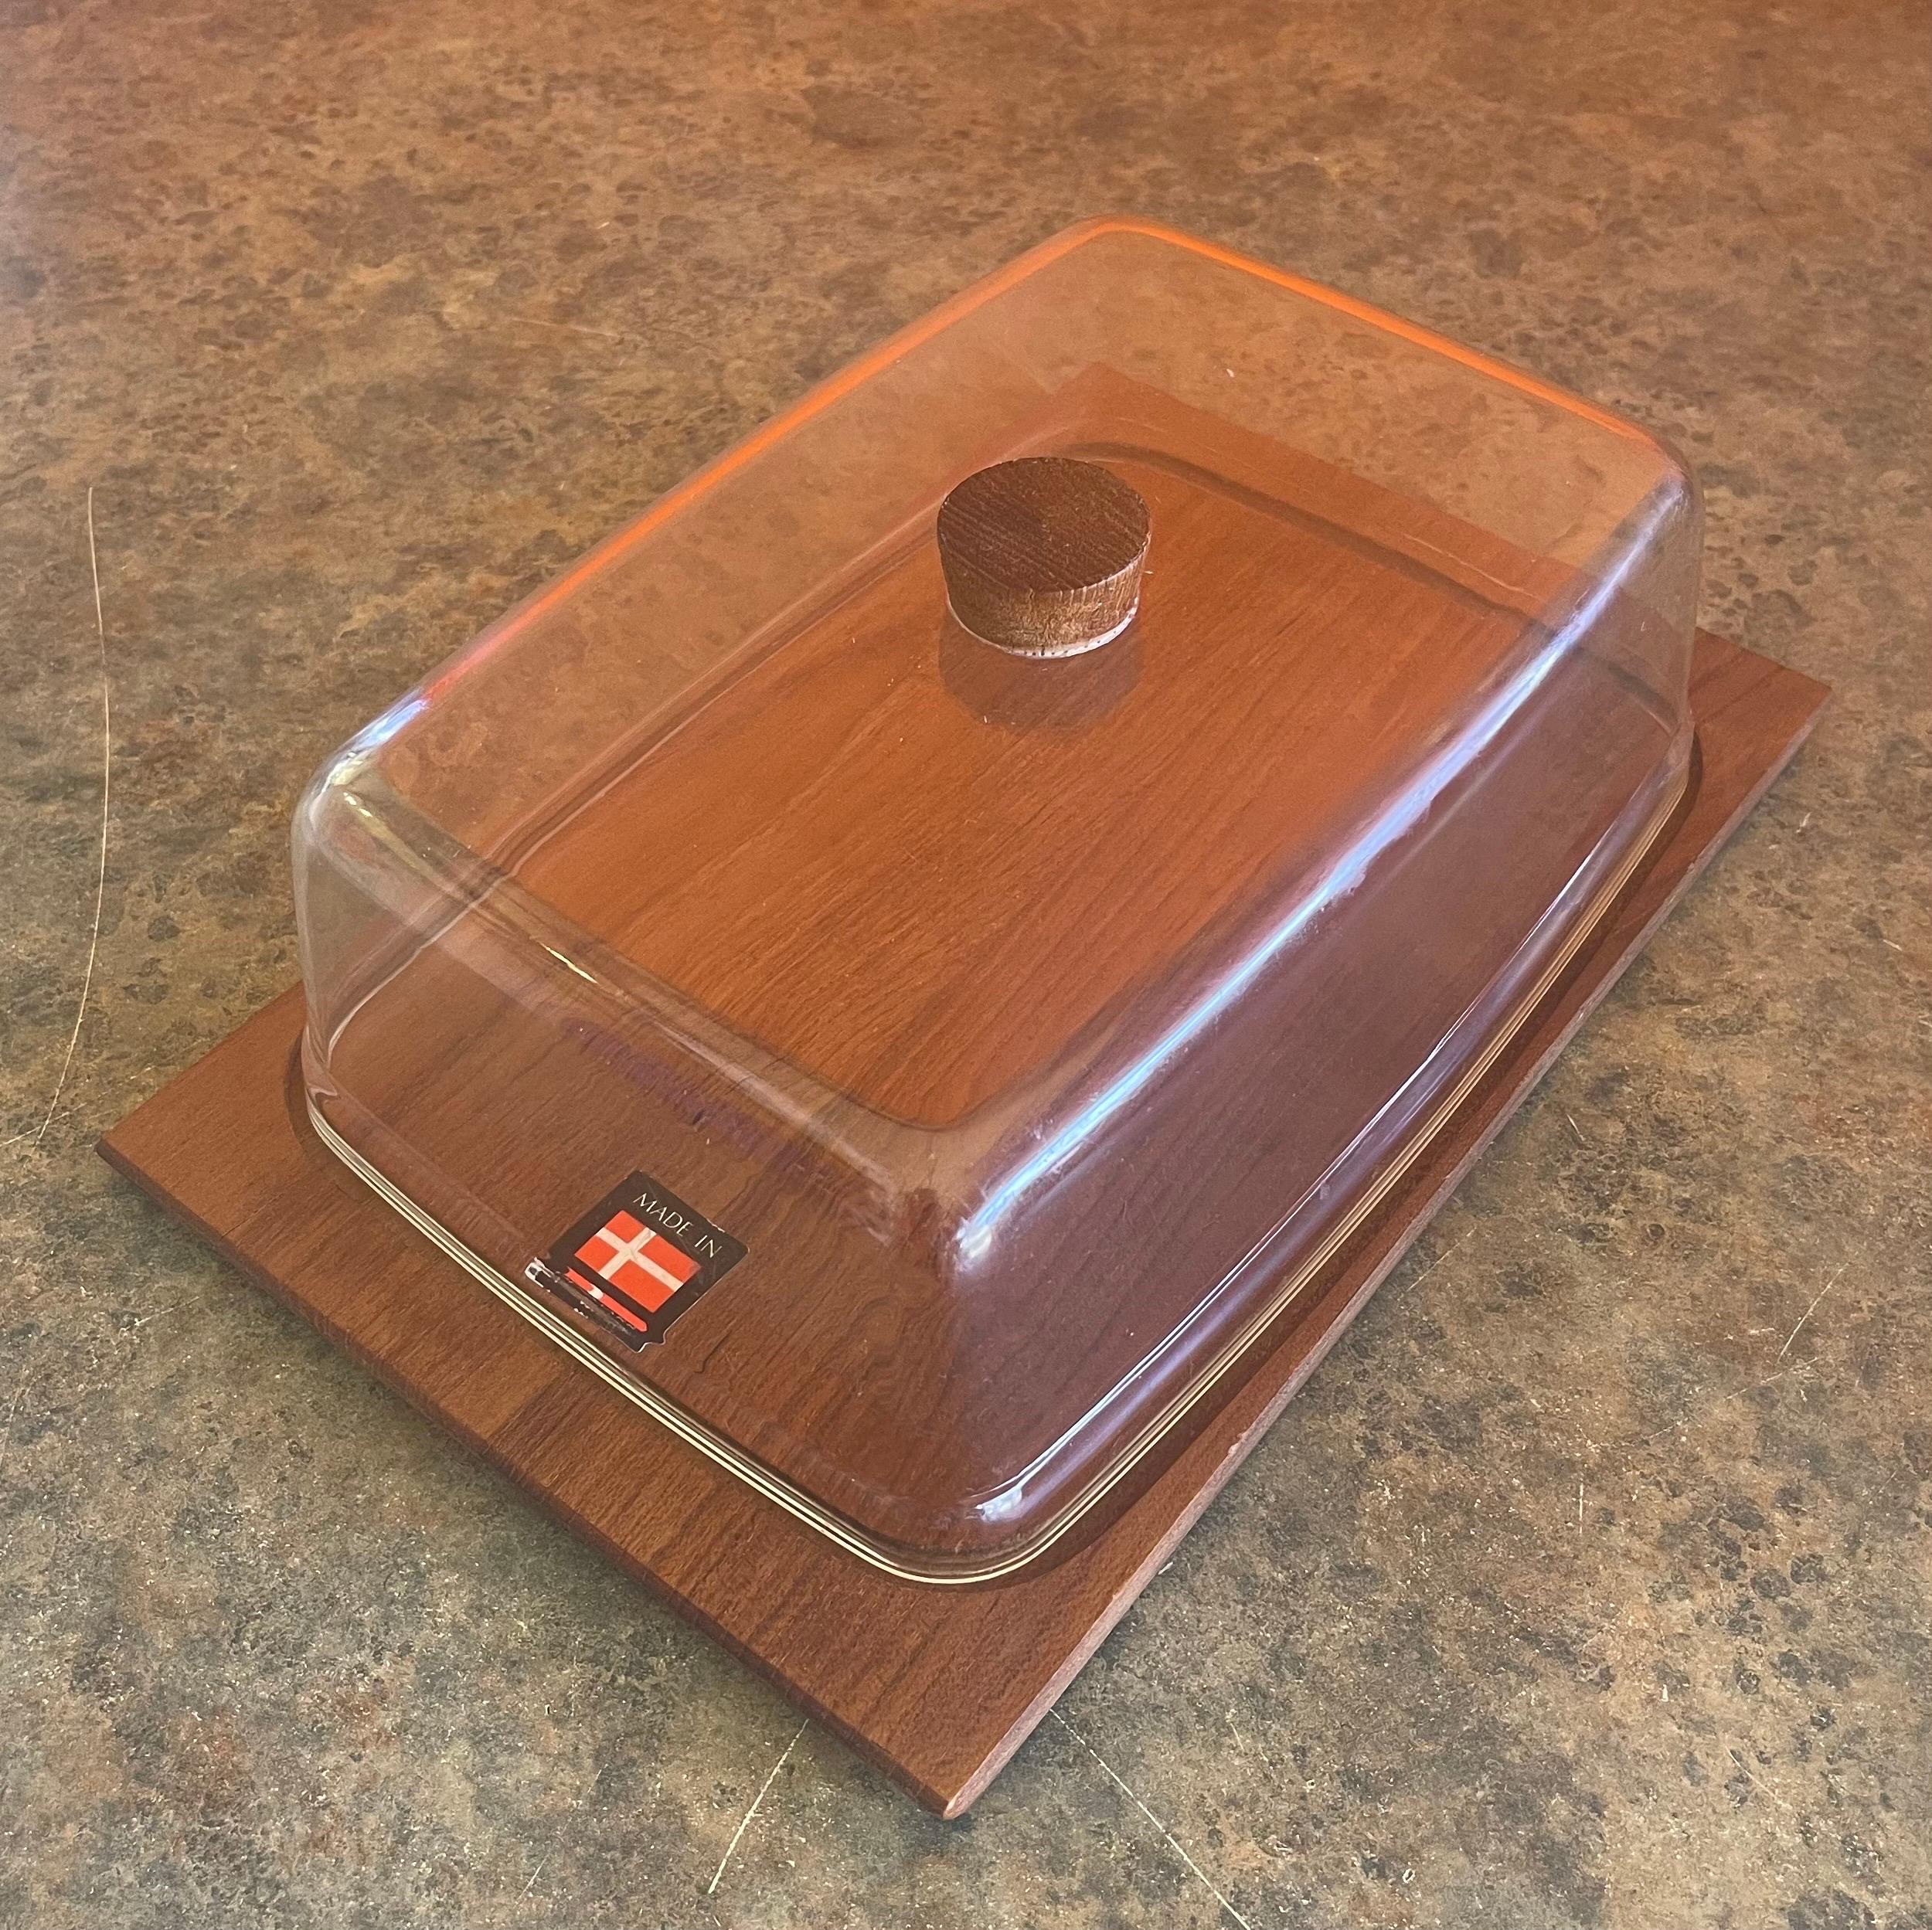 Very nice Danish modern teak tray / cheese board with dome lid, circa 1970s. The board is in good vintage condition and measures 12